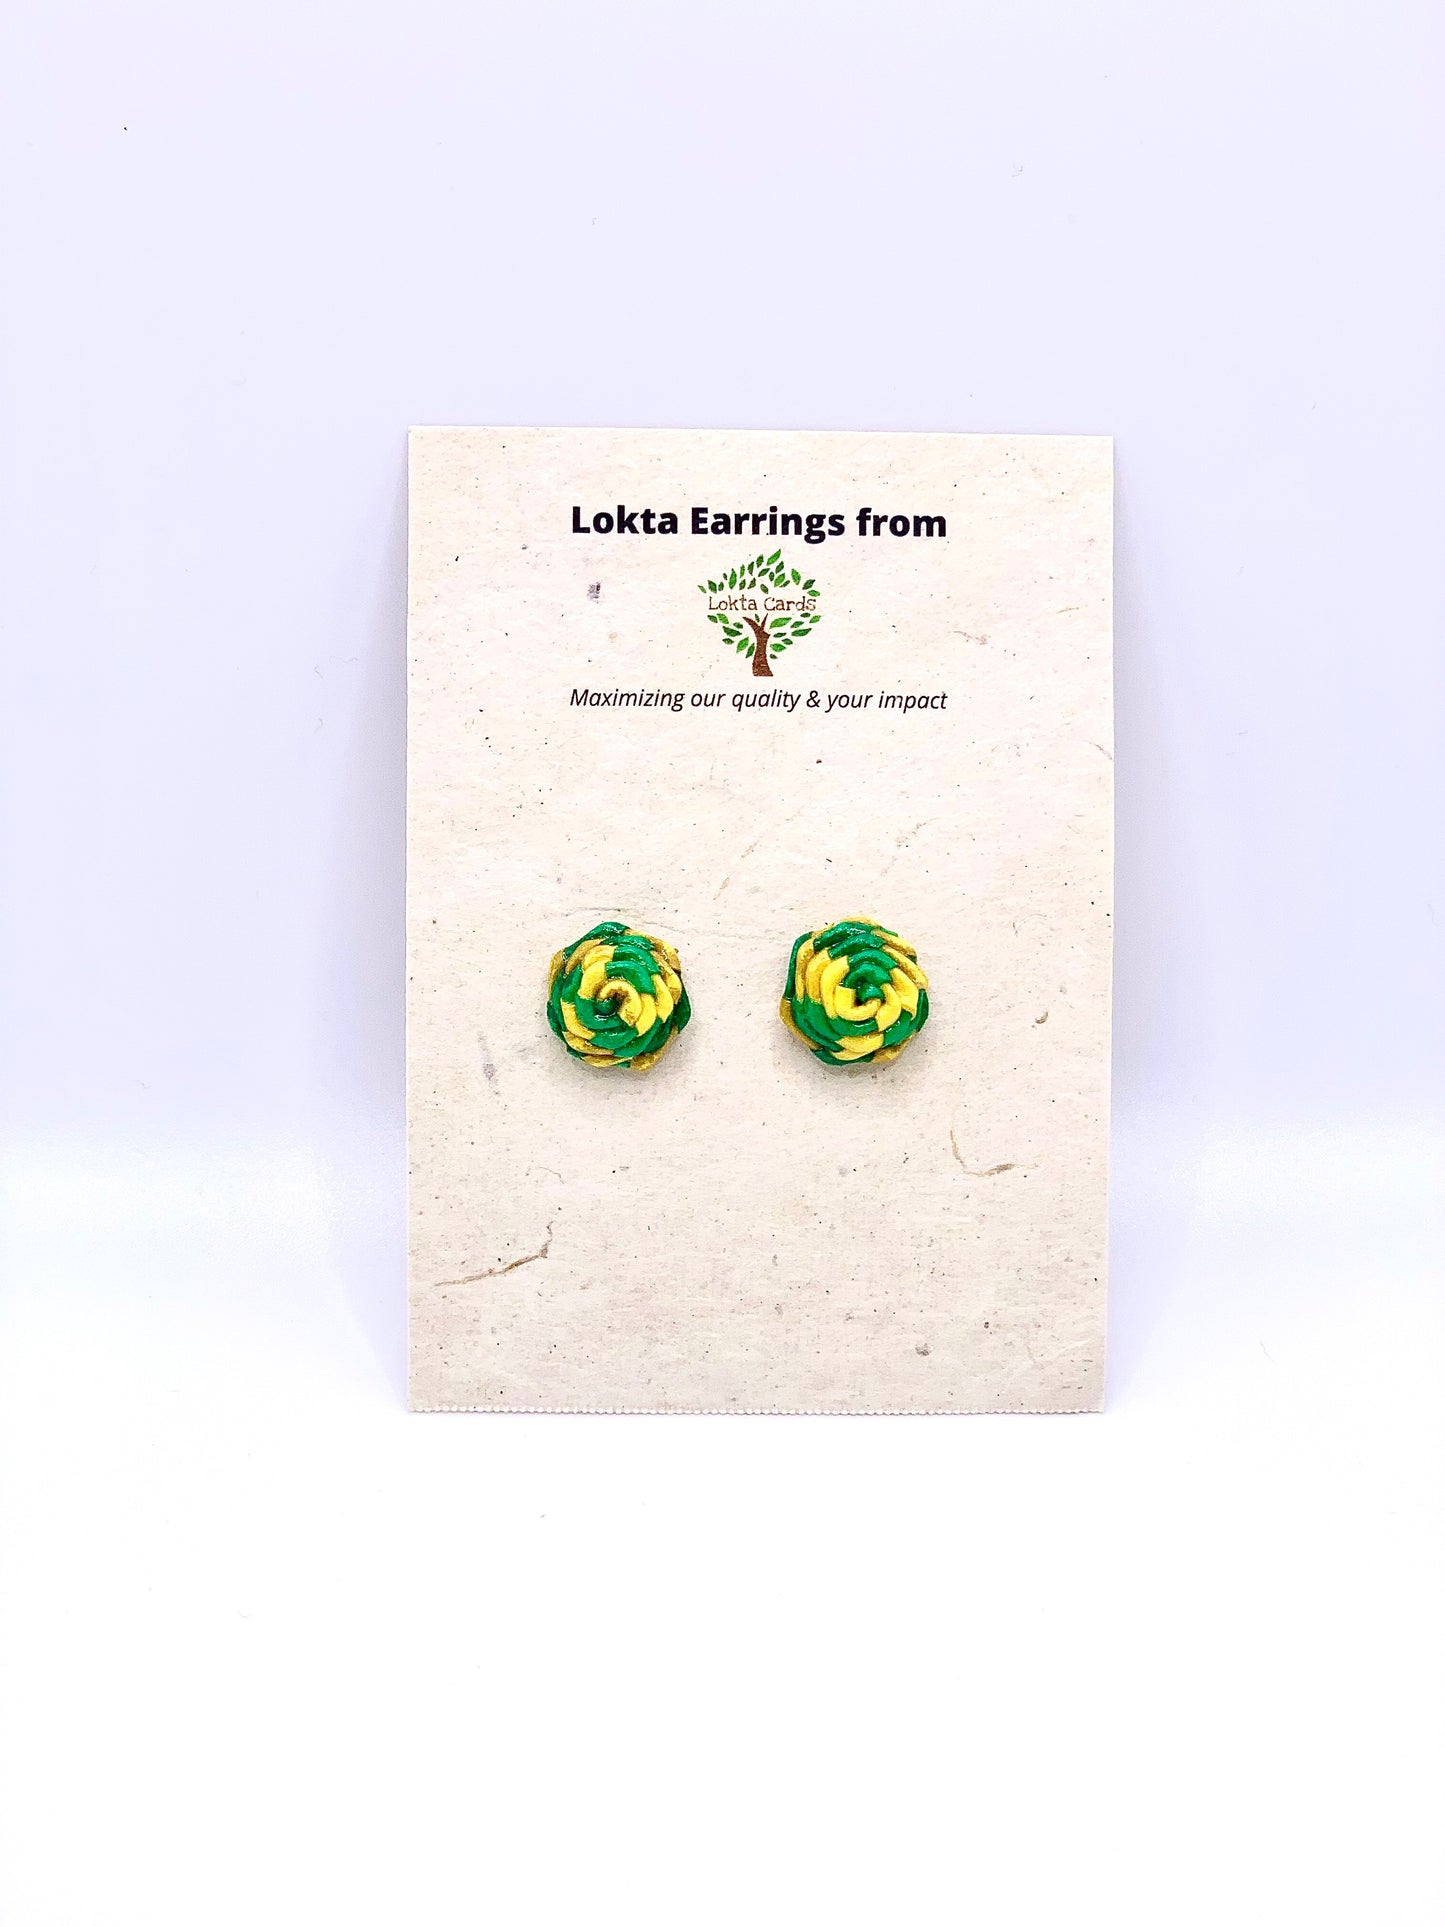 Yellow-Green Quilled Earrings